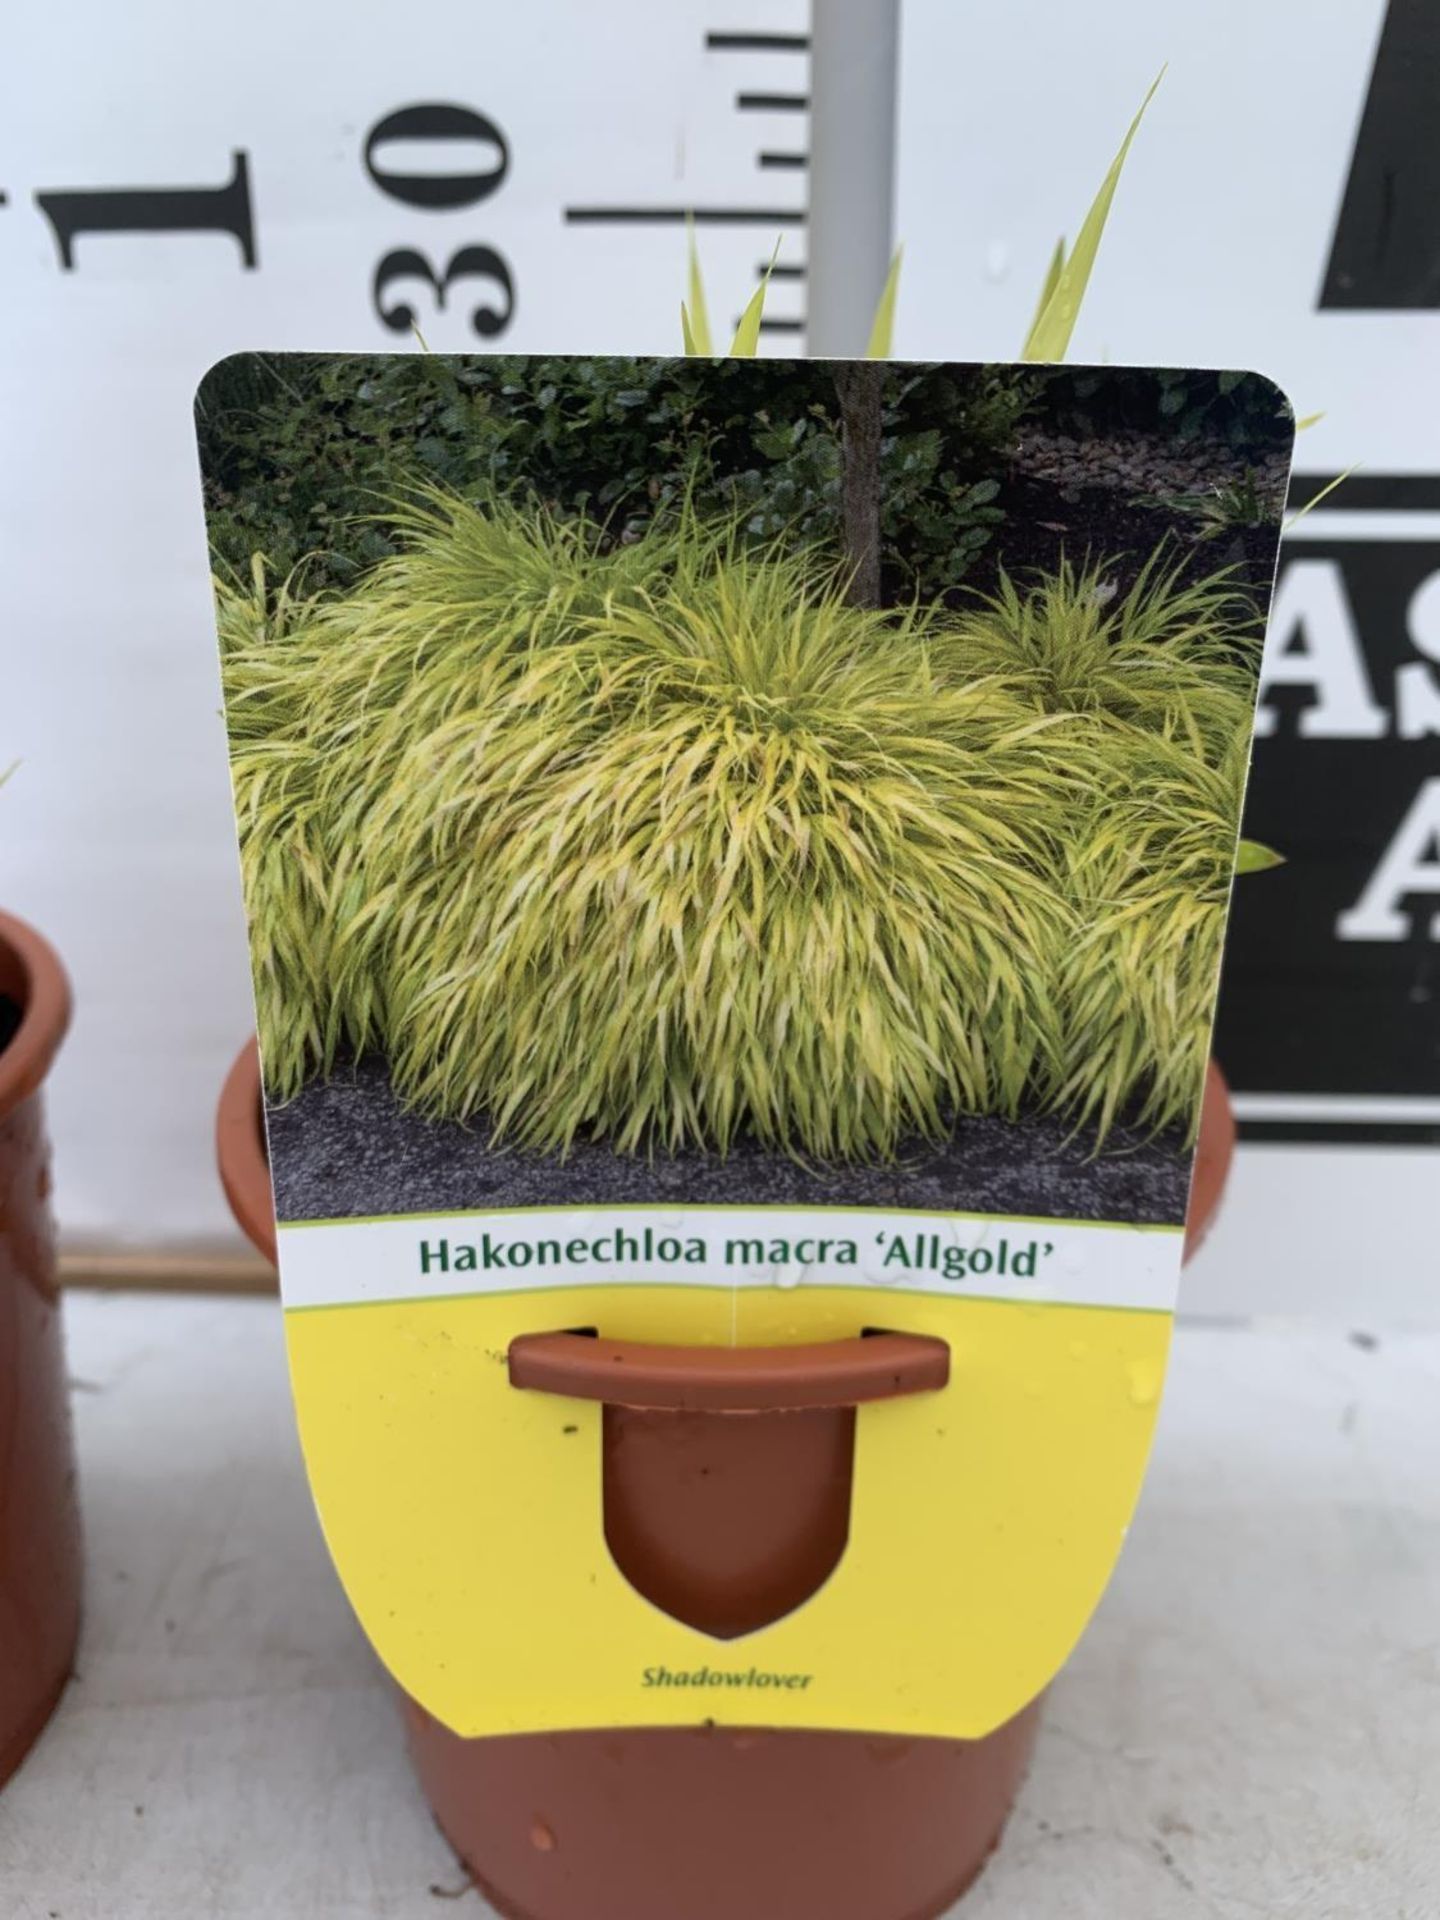 TWO ORNAMENTAL GRASSES HAKONECHLOA MACRA 'ALLGOLD' IN 1 LTR POTS PLUS VAT TO BE SOLD FOR THE TWO - Image 8 of 8